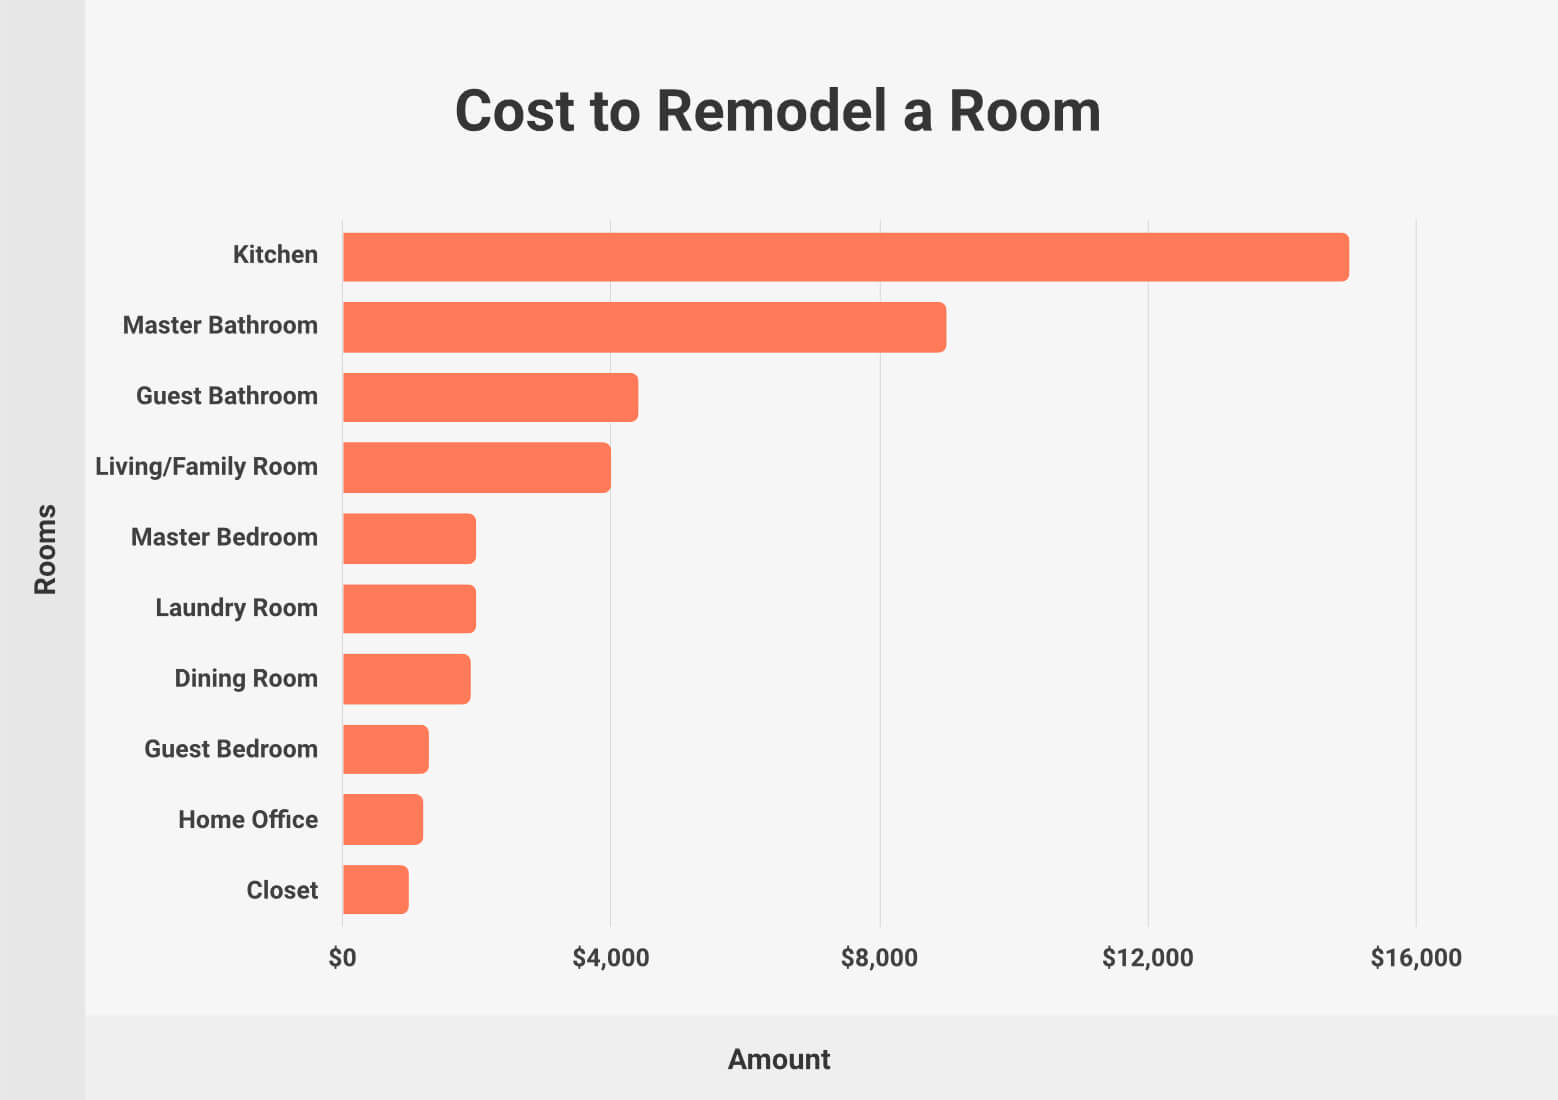 Cost to Remodel a Room